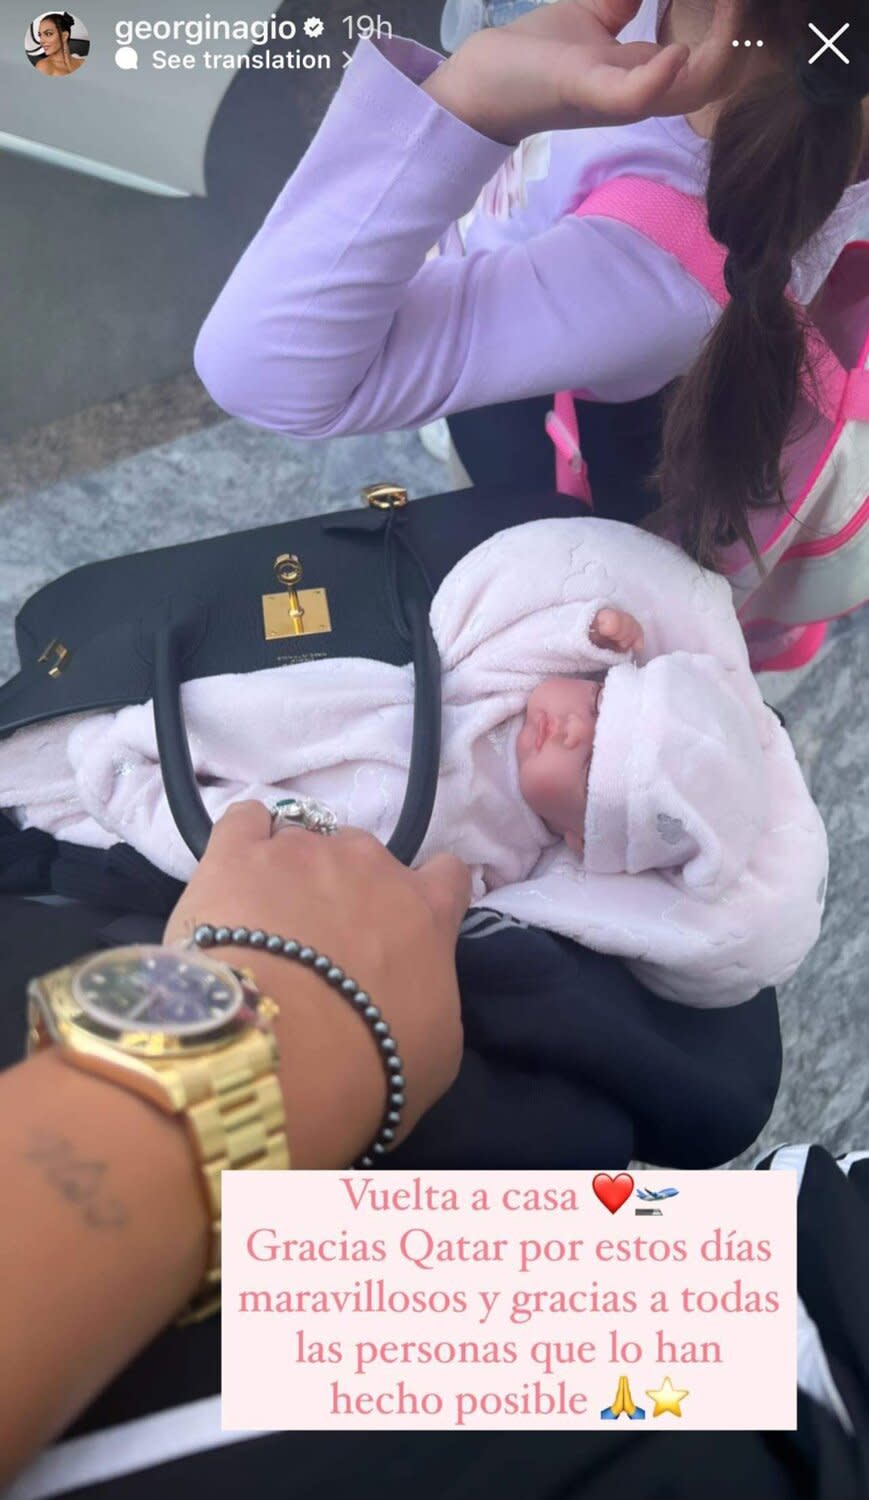 Georgina Rodríguez Shows Daughter's Baby Doll in Her Purse as They Leave Qatar After World Cup